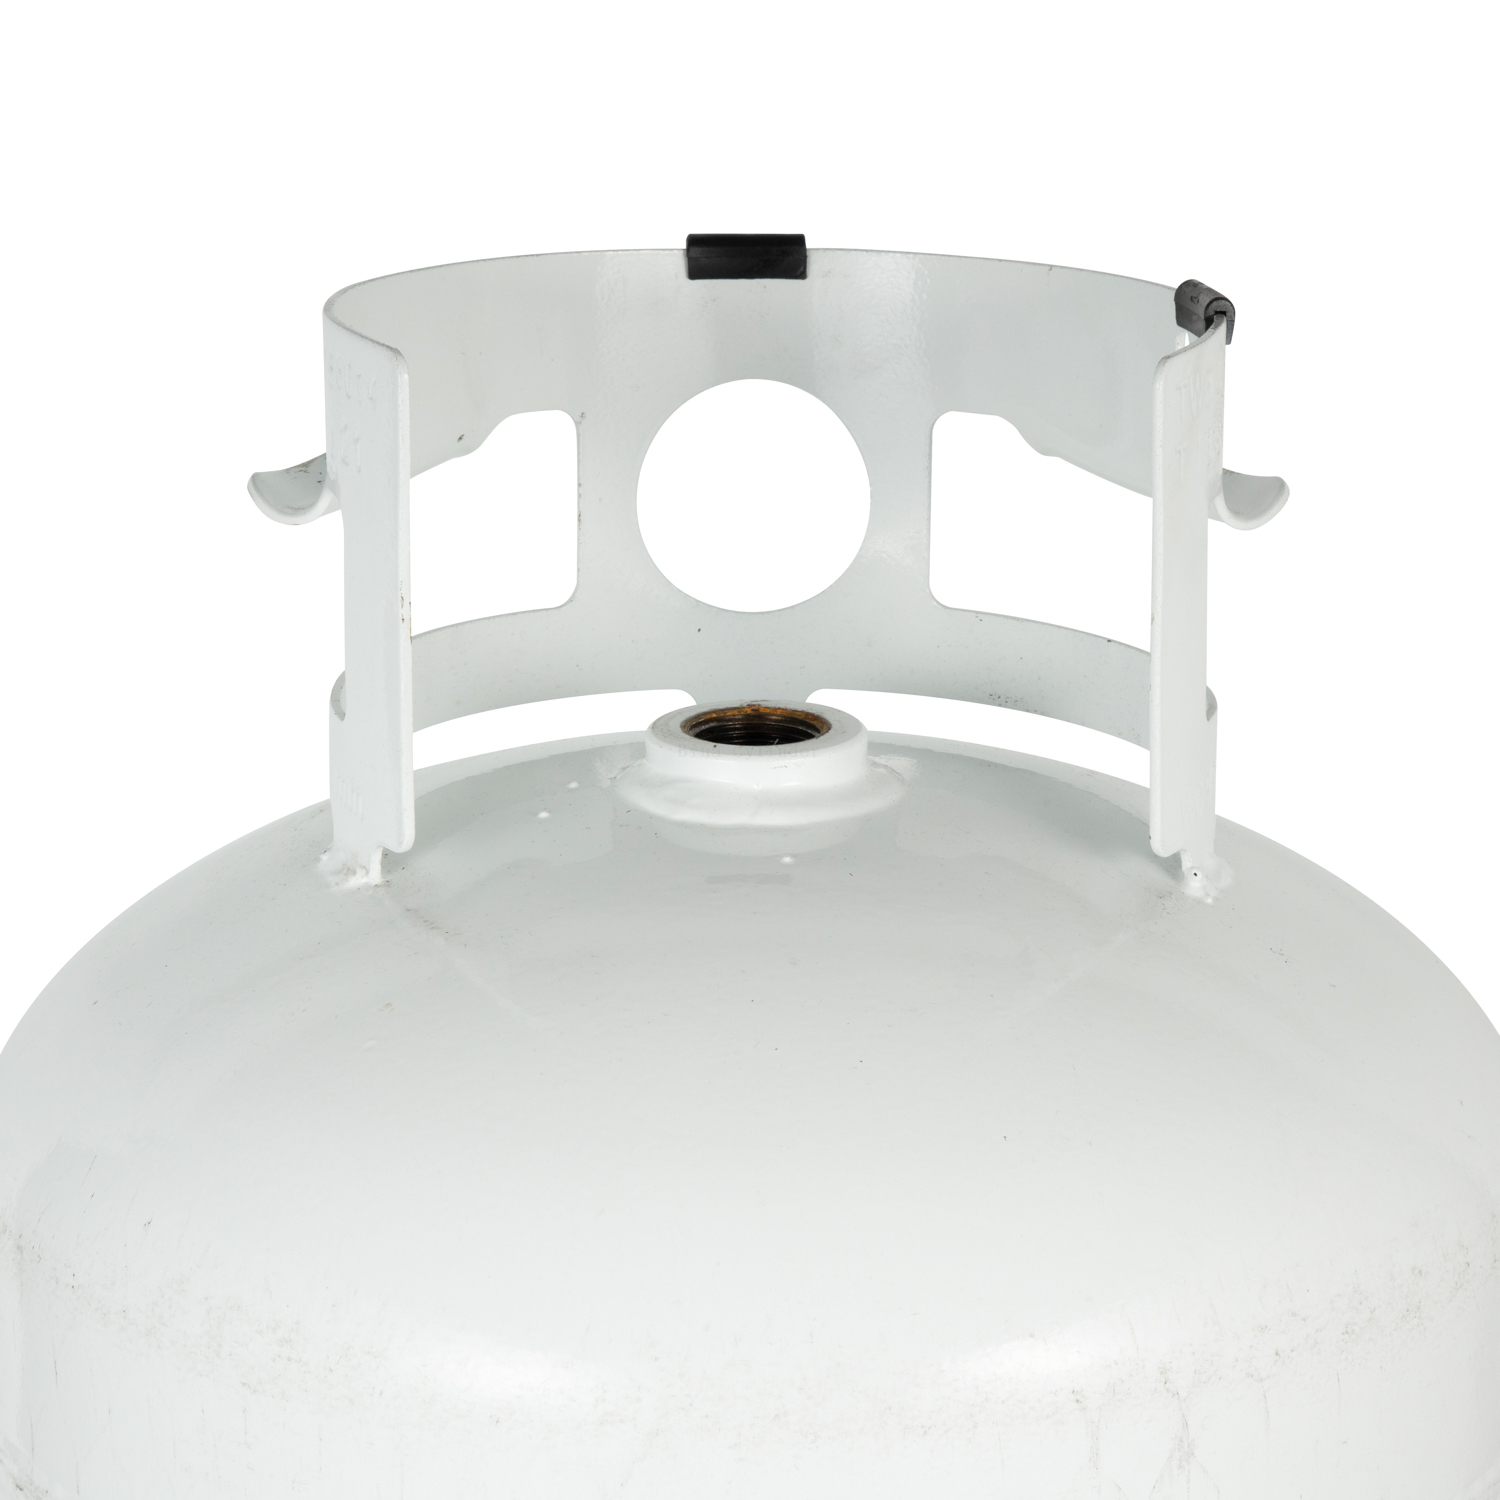 Lpg Gas Cylinder For Cooking And Camping Portable 